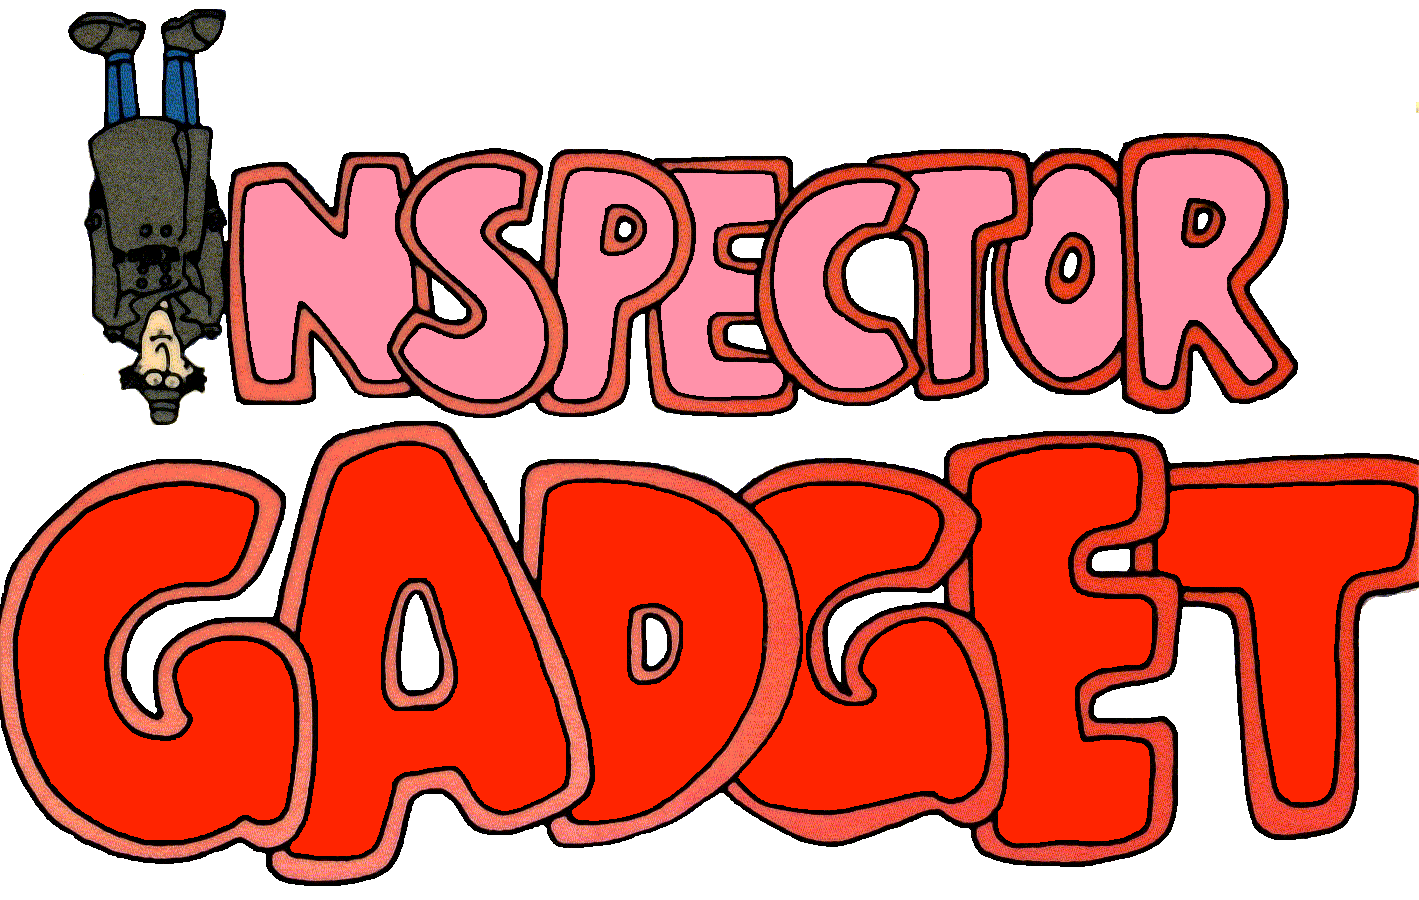 inspector gadget logo 10 free Cliparts | Download images on Clipground 2021